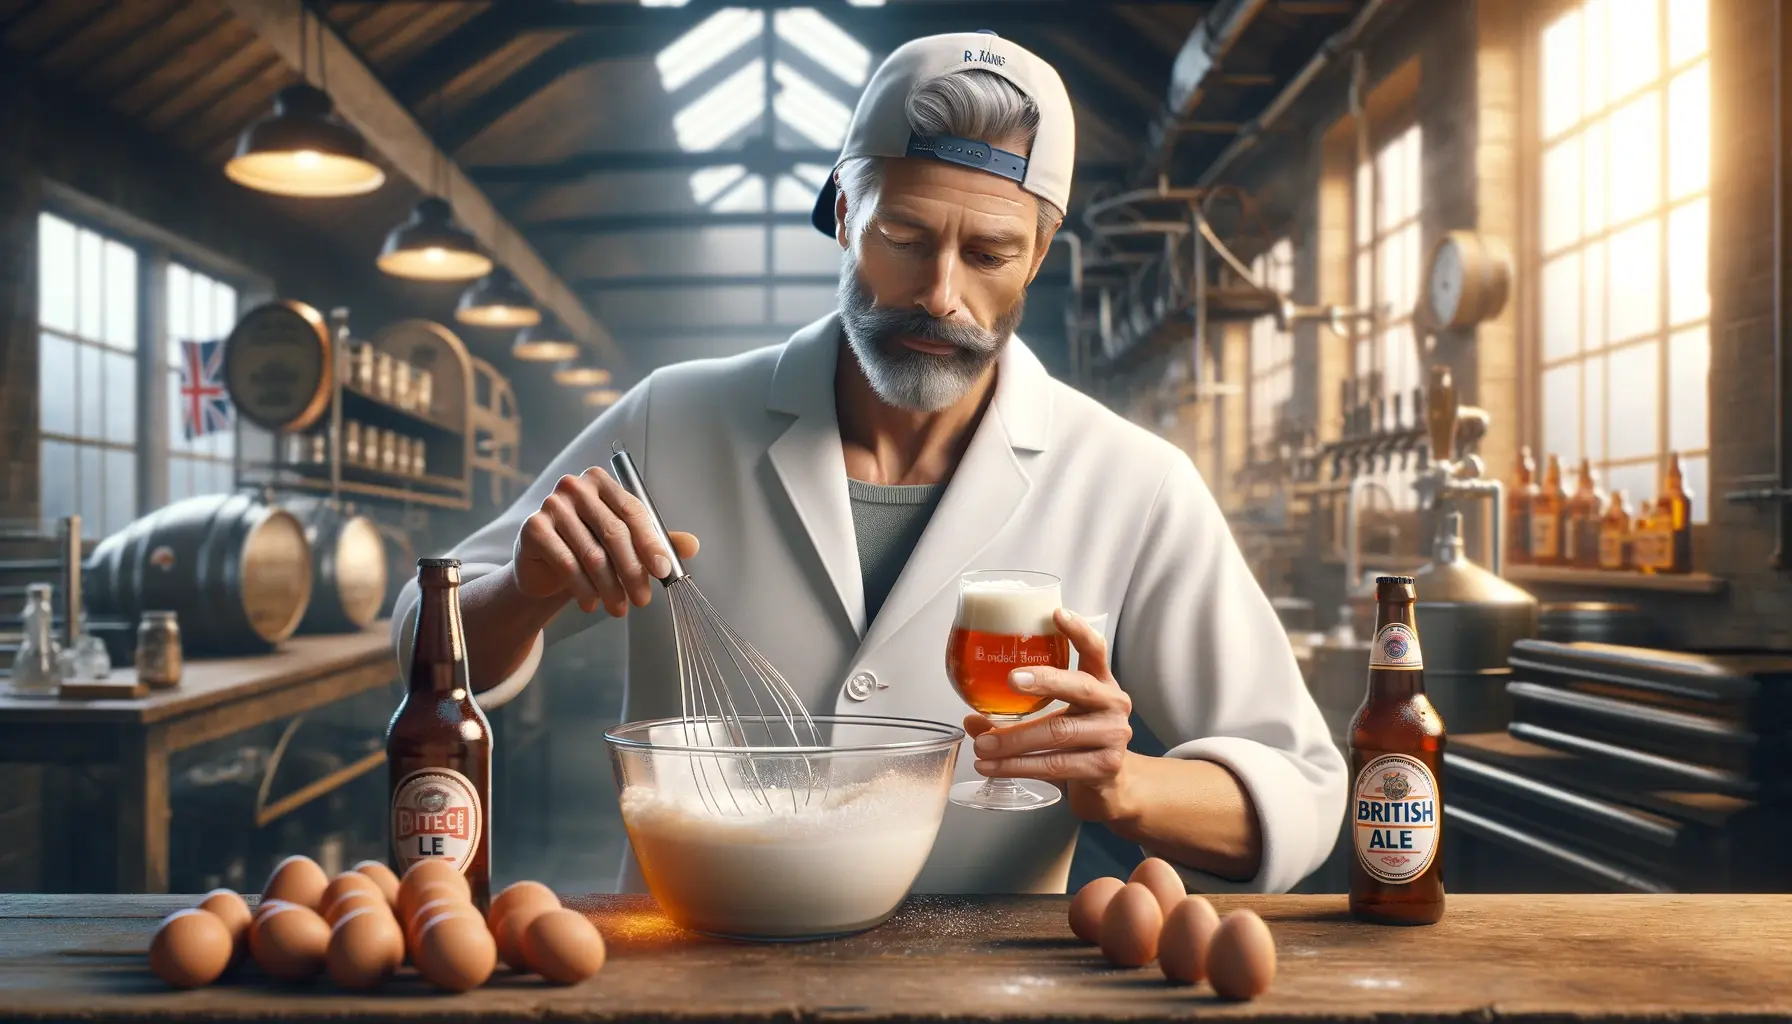 Dr. Hans in a home brewery, preparing raw egg beer. He is whisking a raw egg with sugar in a glass, with a bottle of British ale